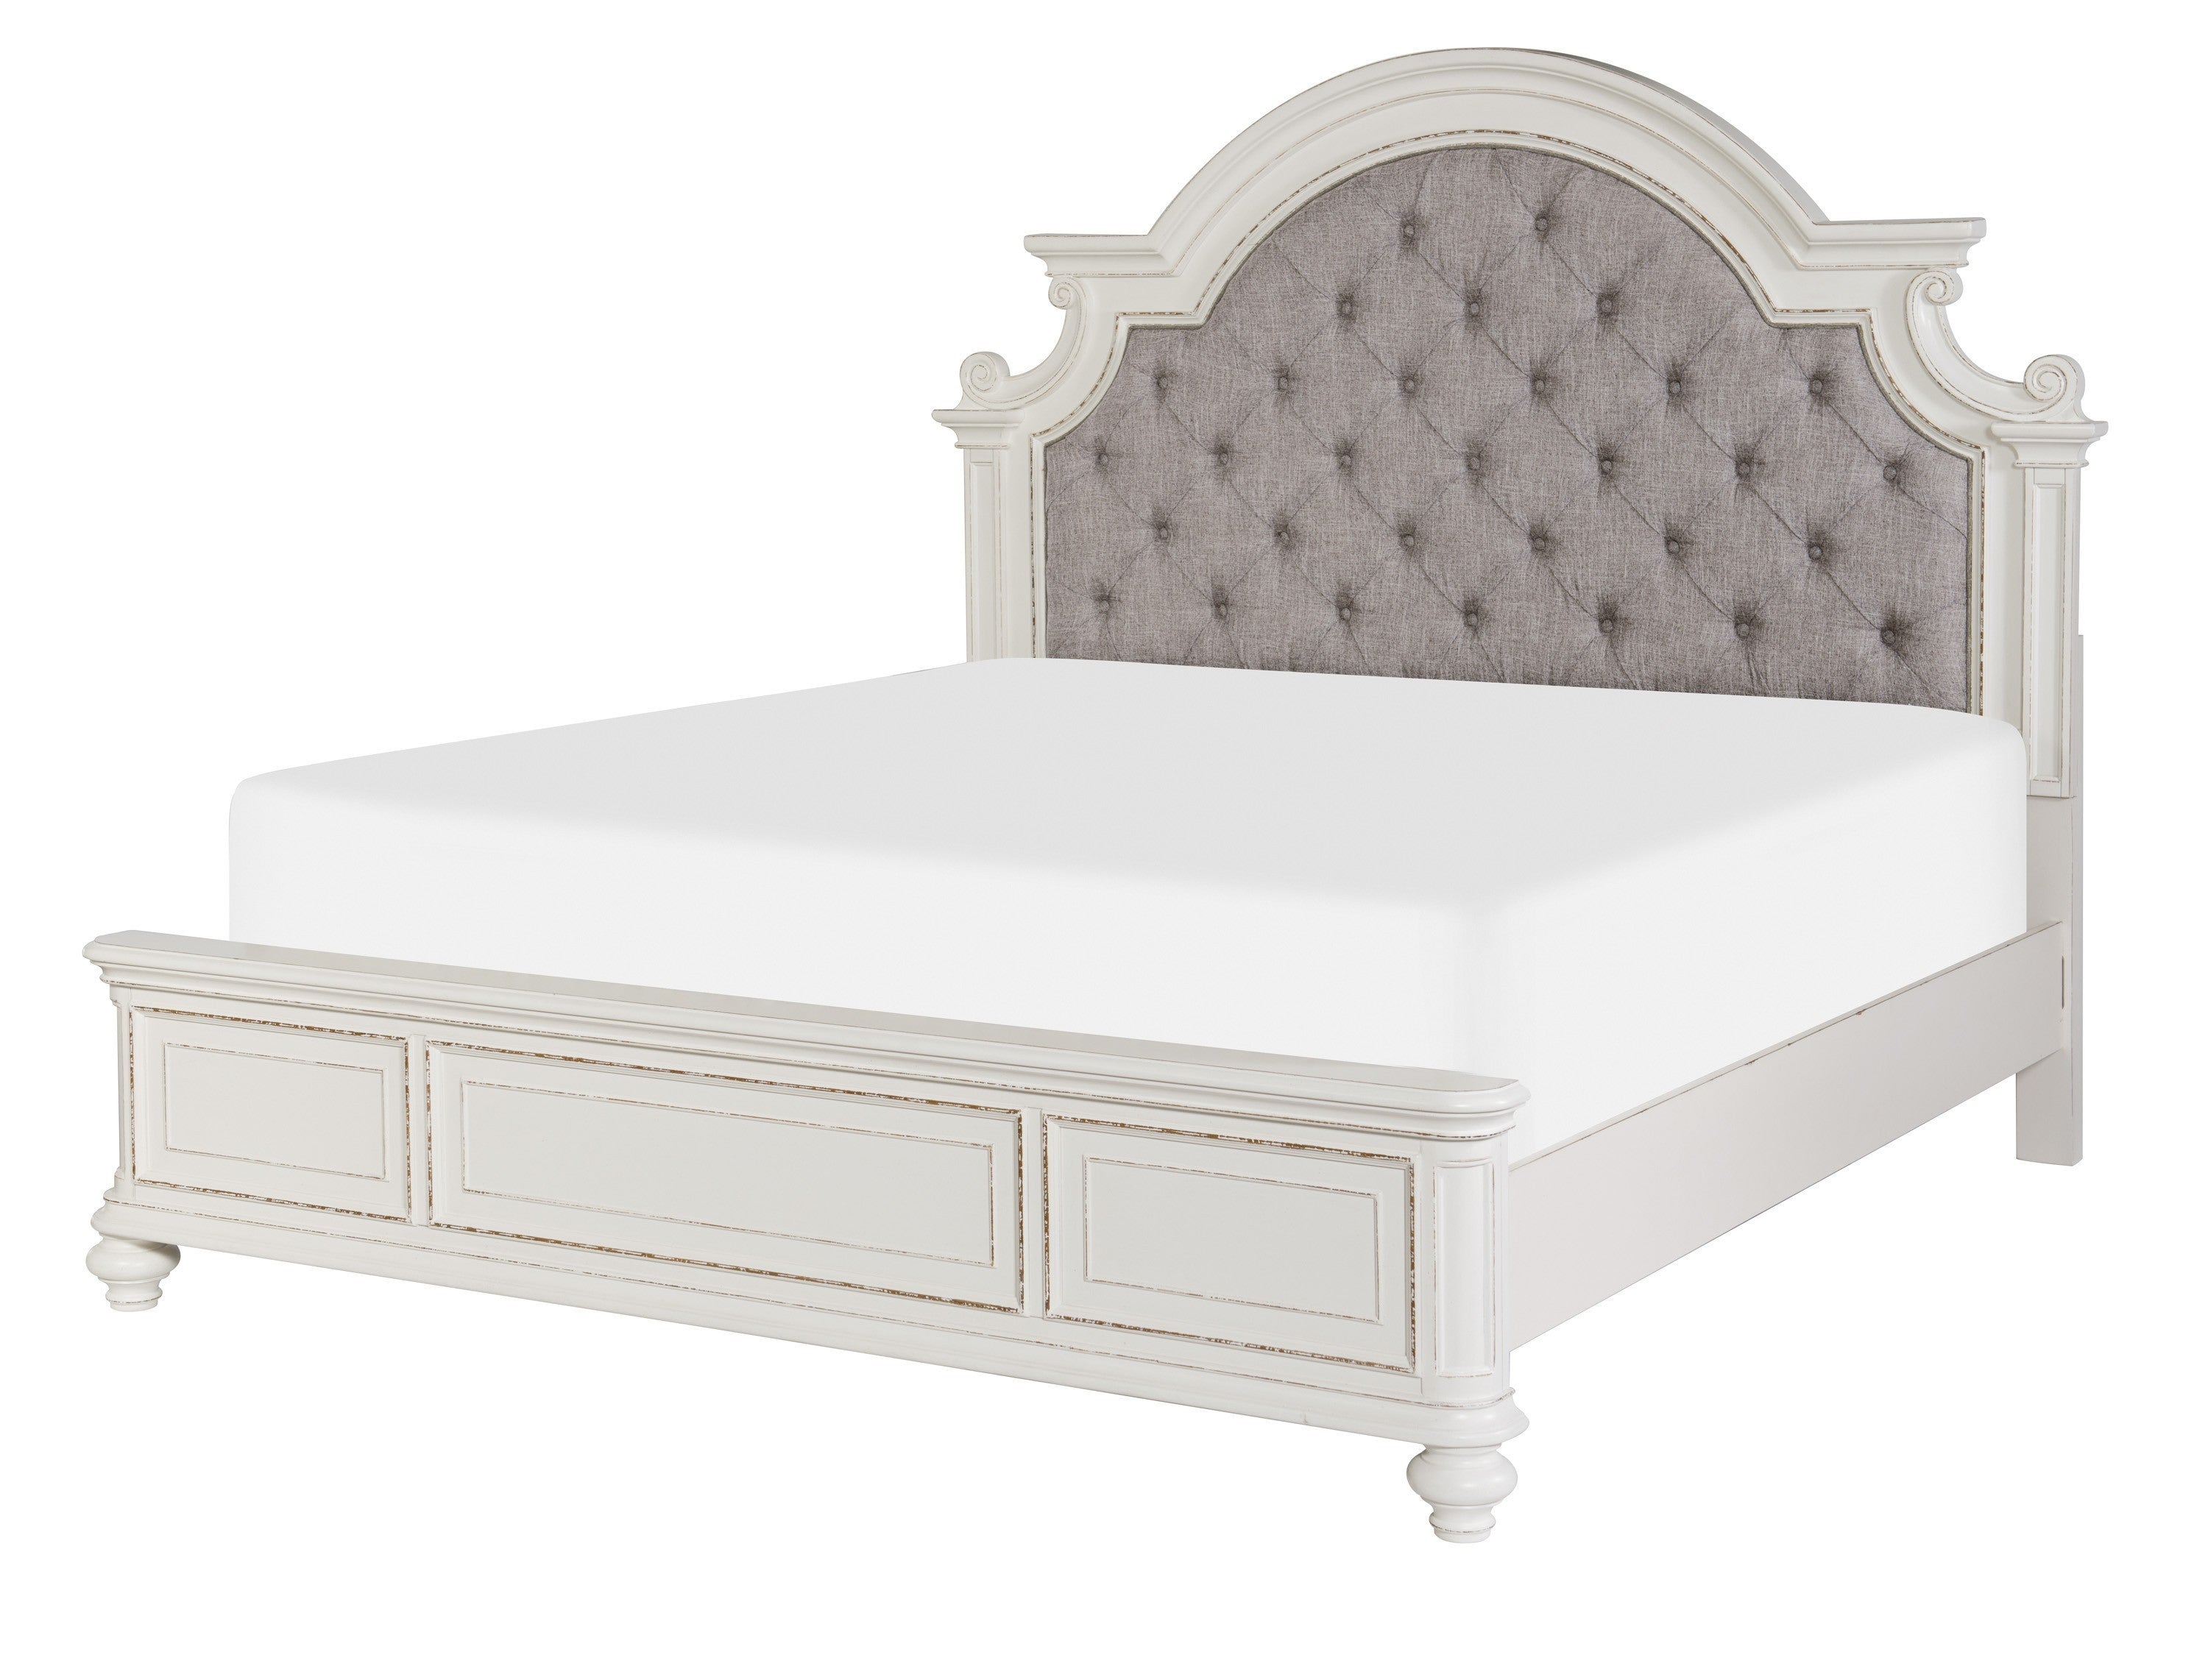 King Size Bed Button-Tufted Upholstered Headboard - Antique White Finish